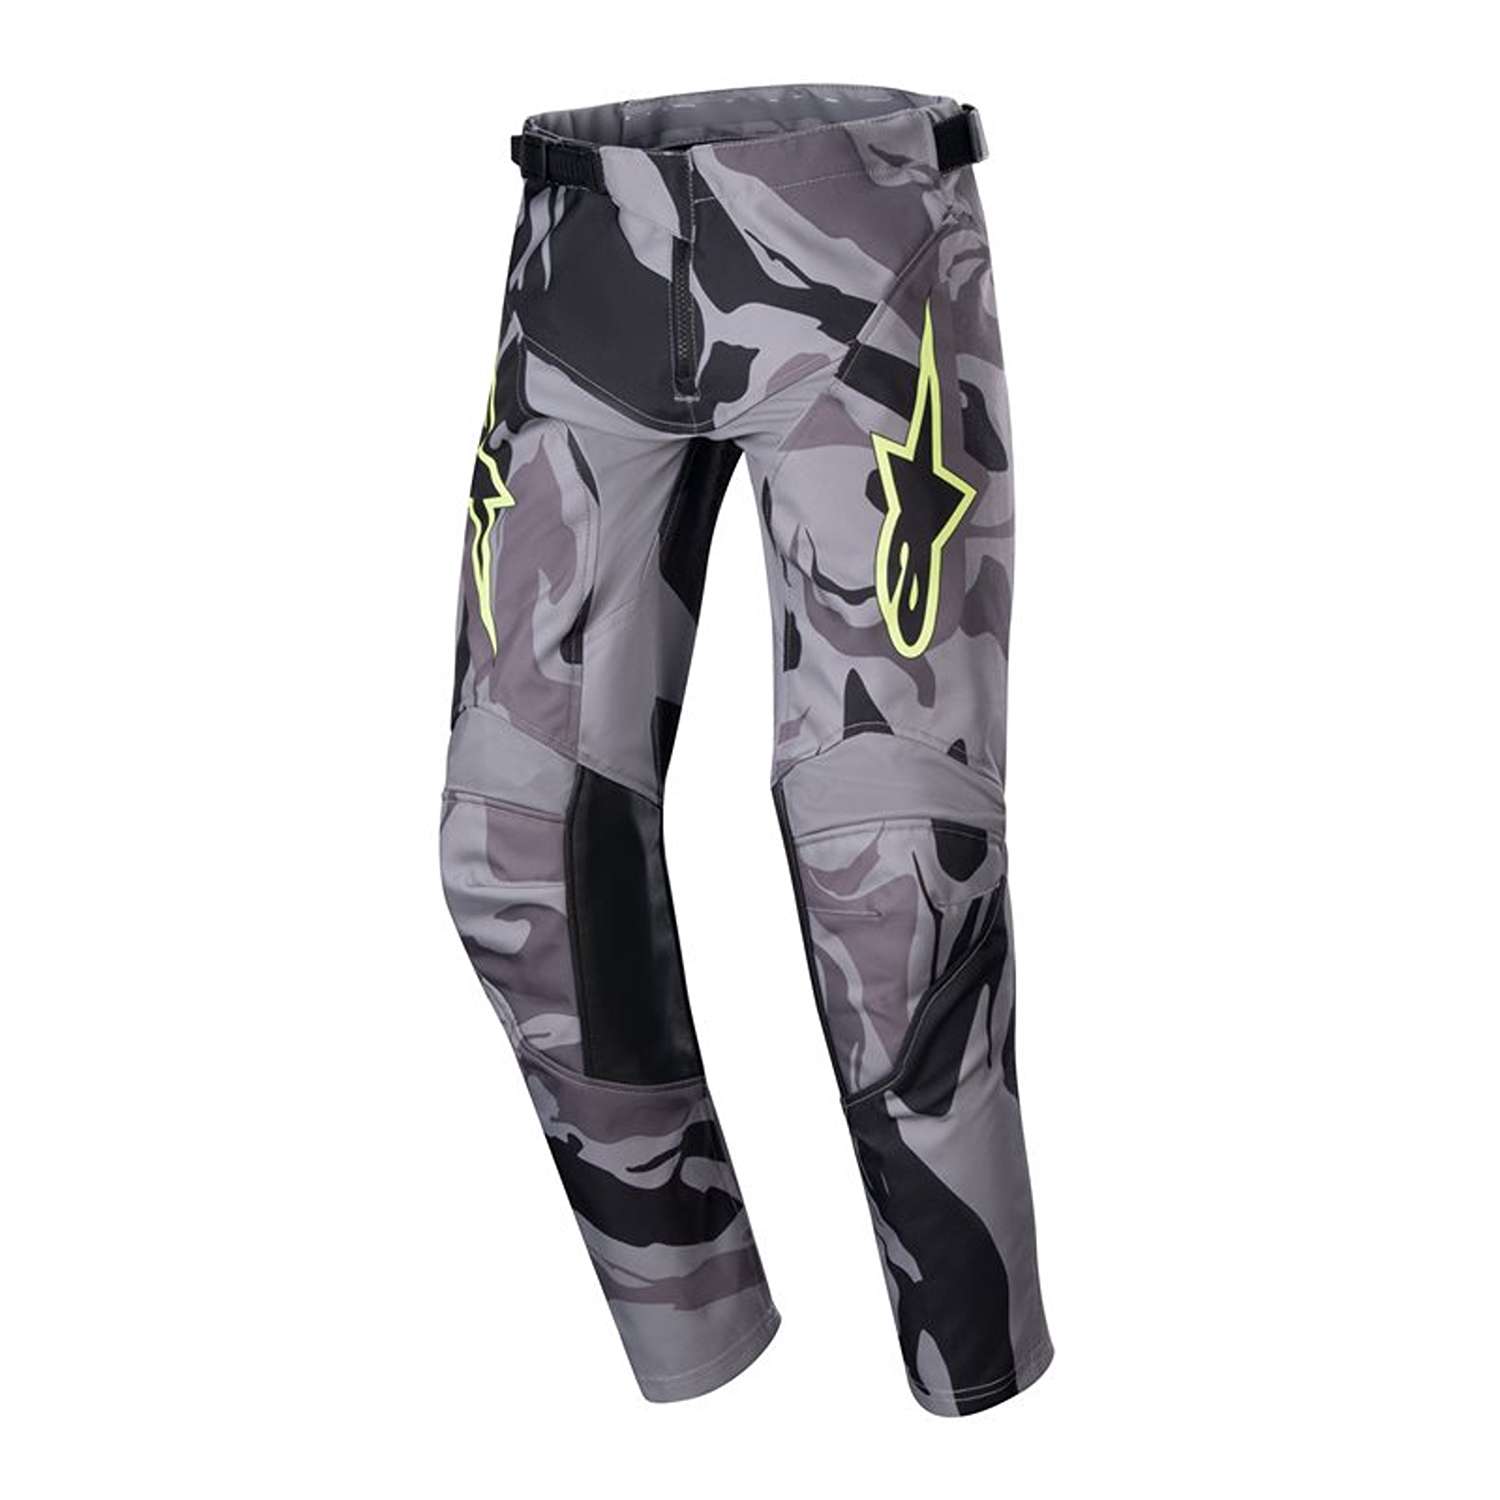 Image of EU Alpinestars Youth Racer Tactical Pants Cast Gray Camo Magnet Taille 24